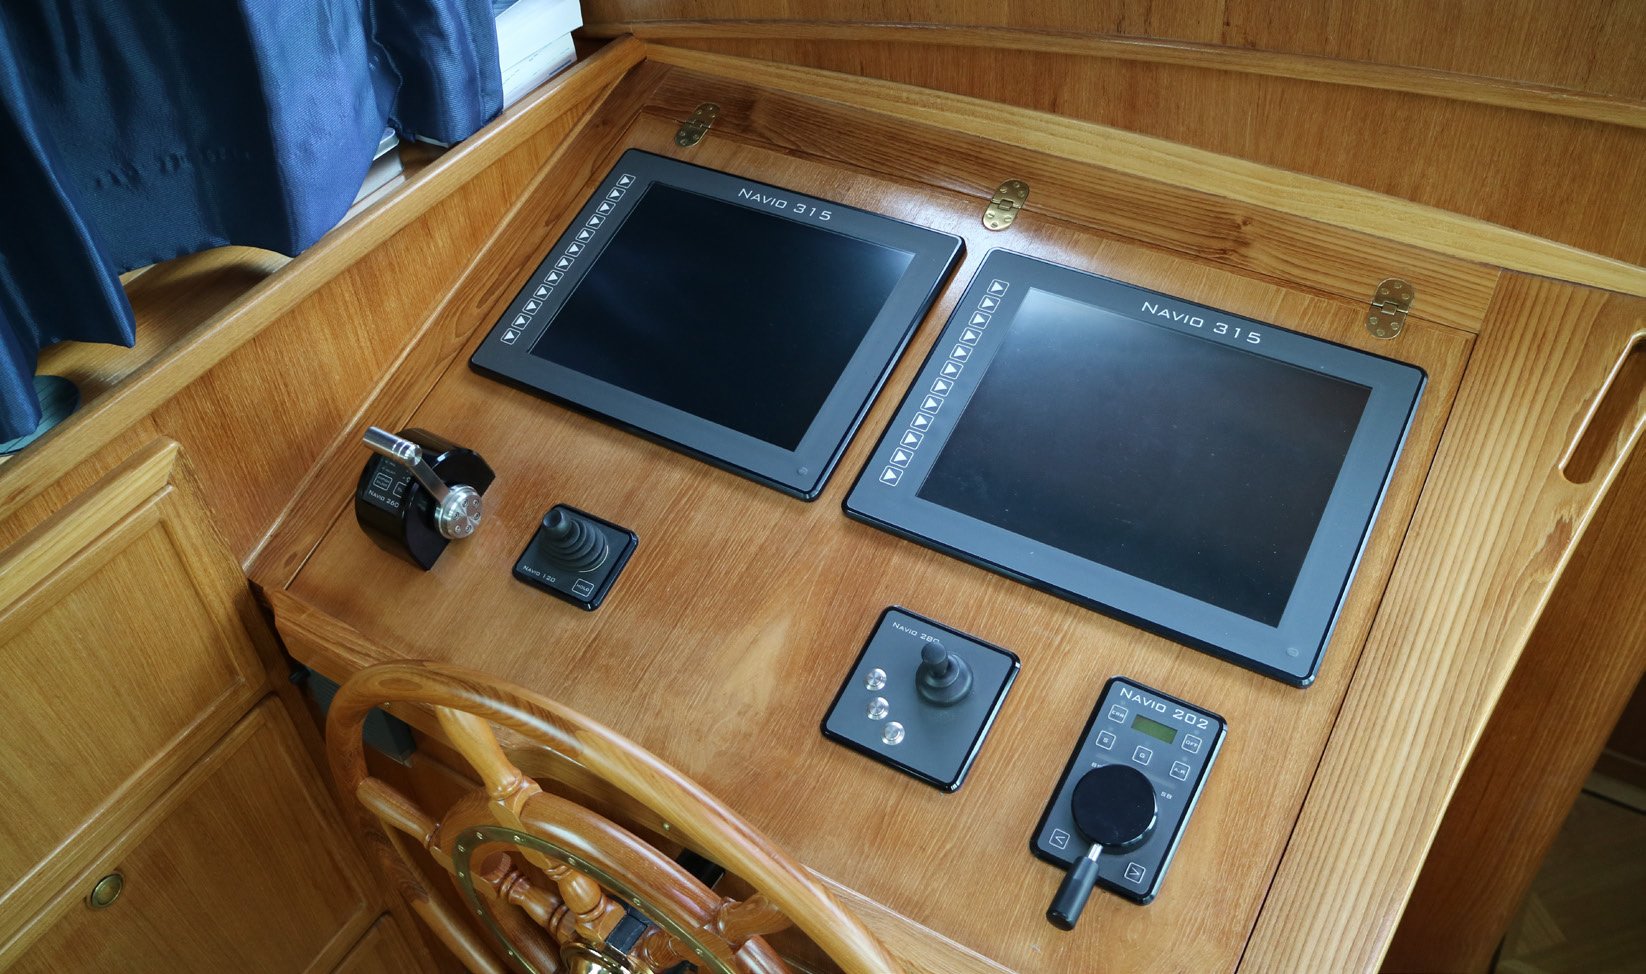 How a miniature GNSS/INS enabled Hydrosta to create the first auto-pilot for small boats